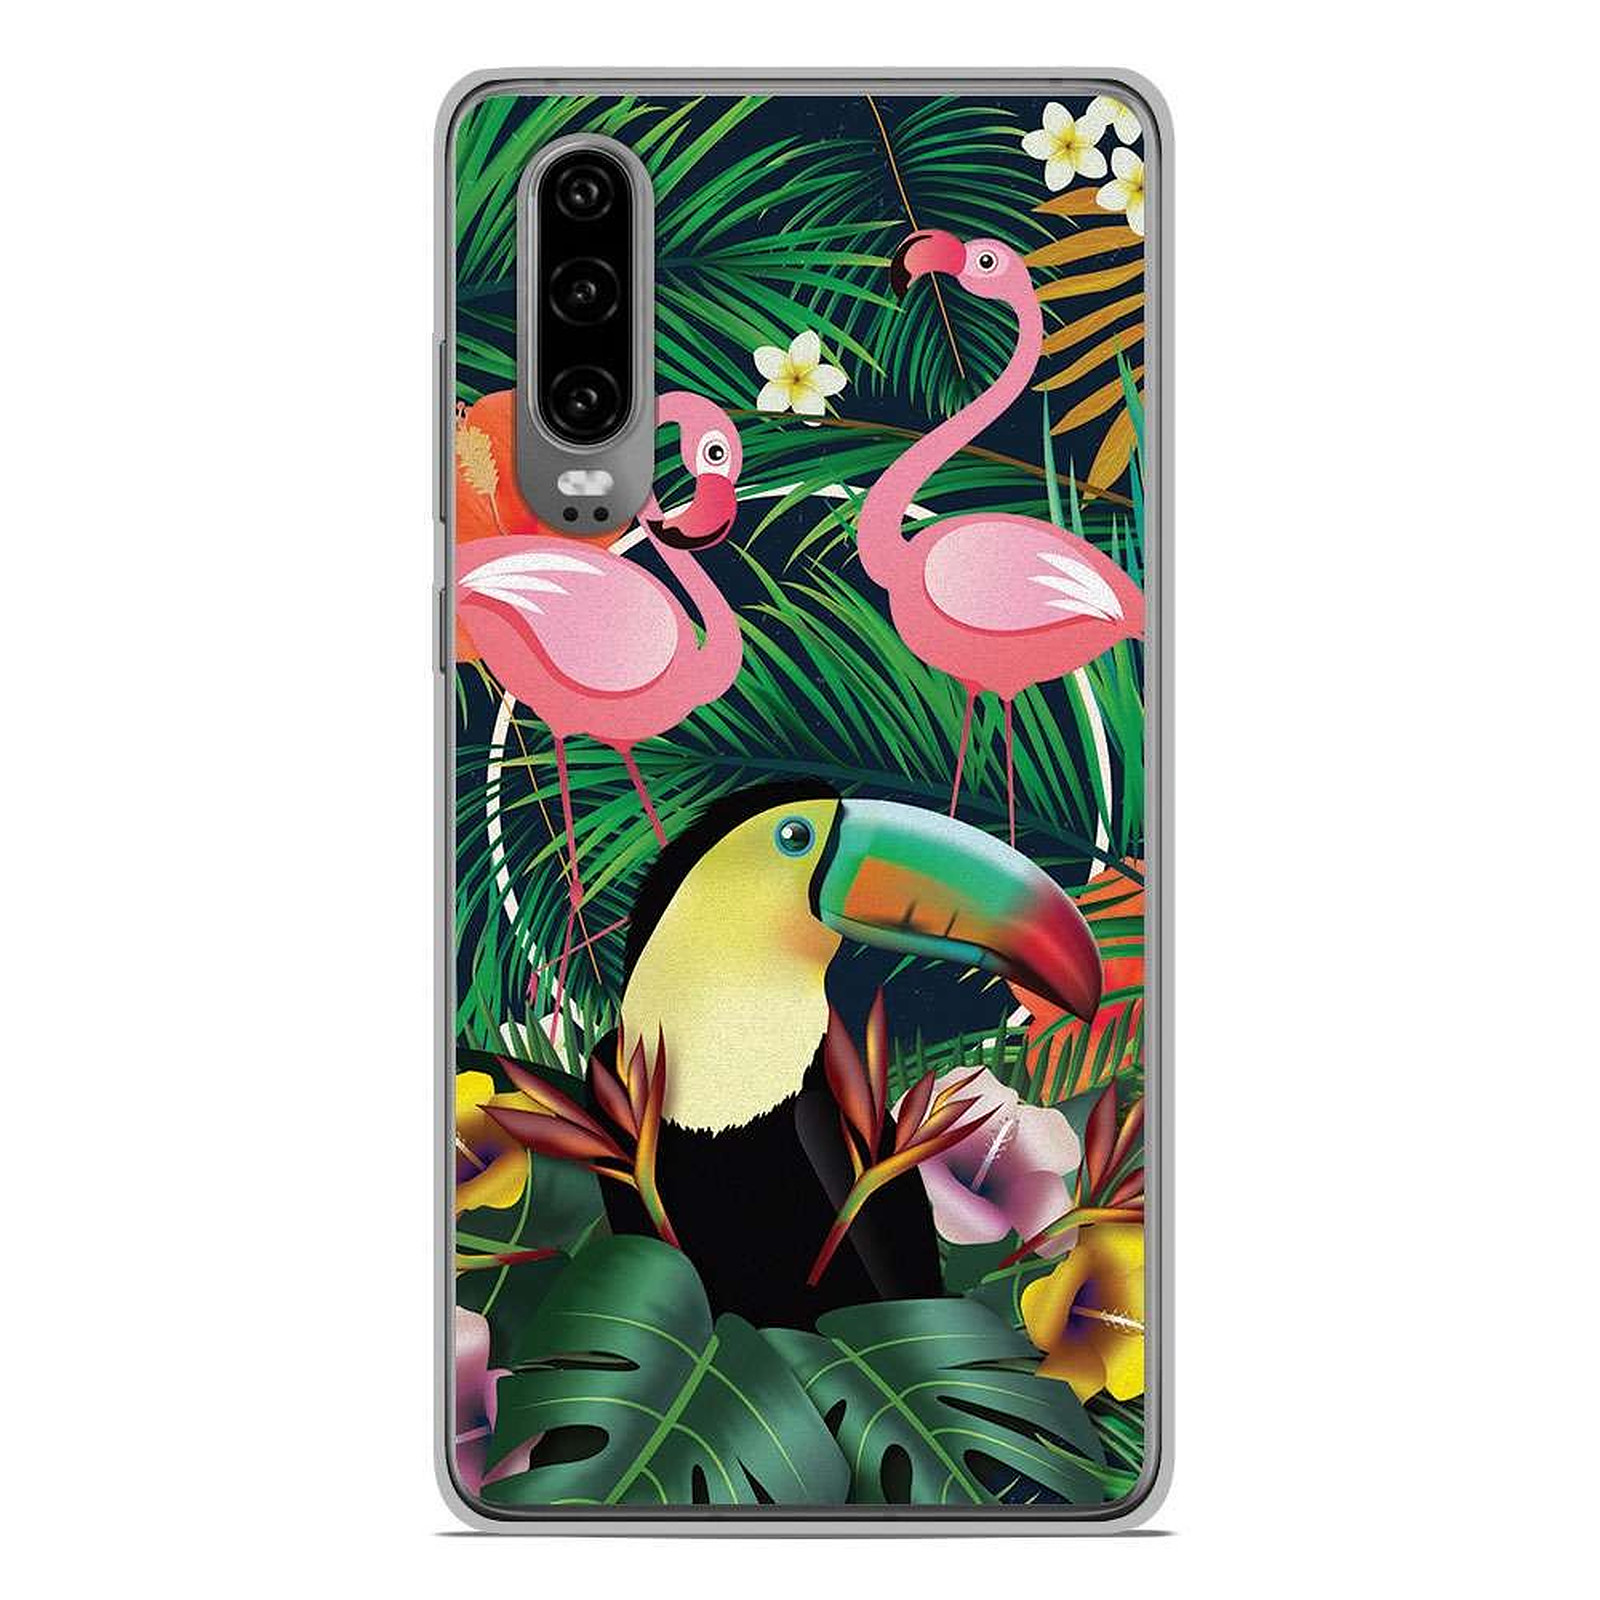 1001 Coques Coque silicone gel Huawei P30 motif Tropical Toucan - Coque telephone 1001Coques